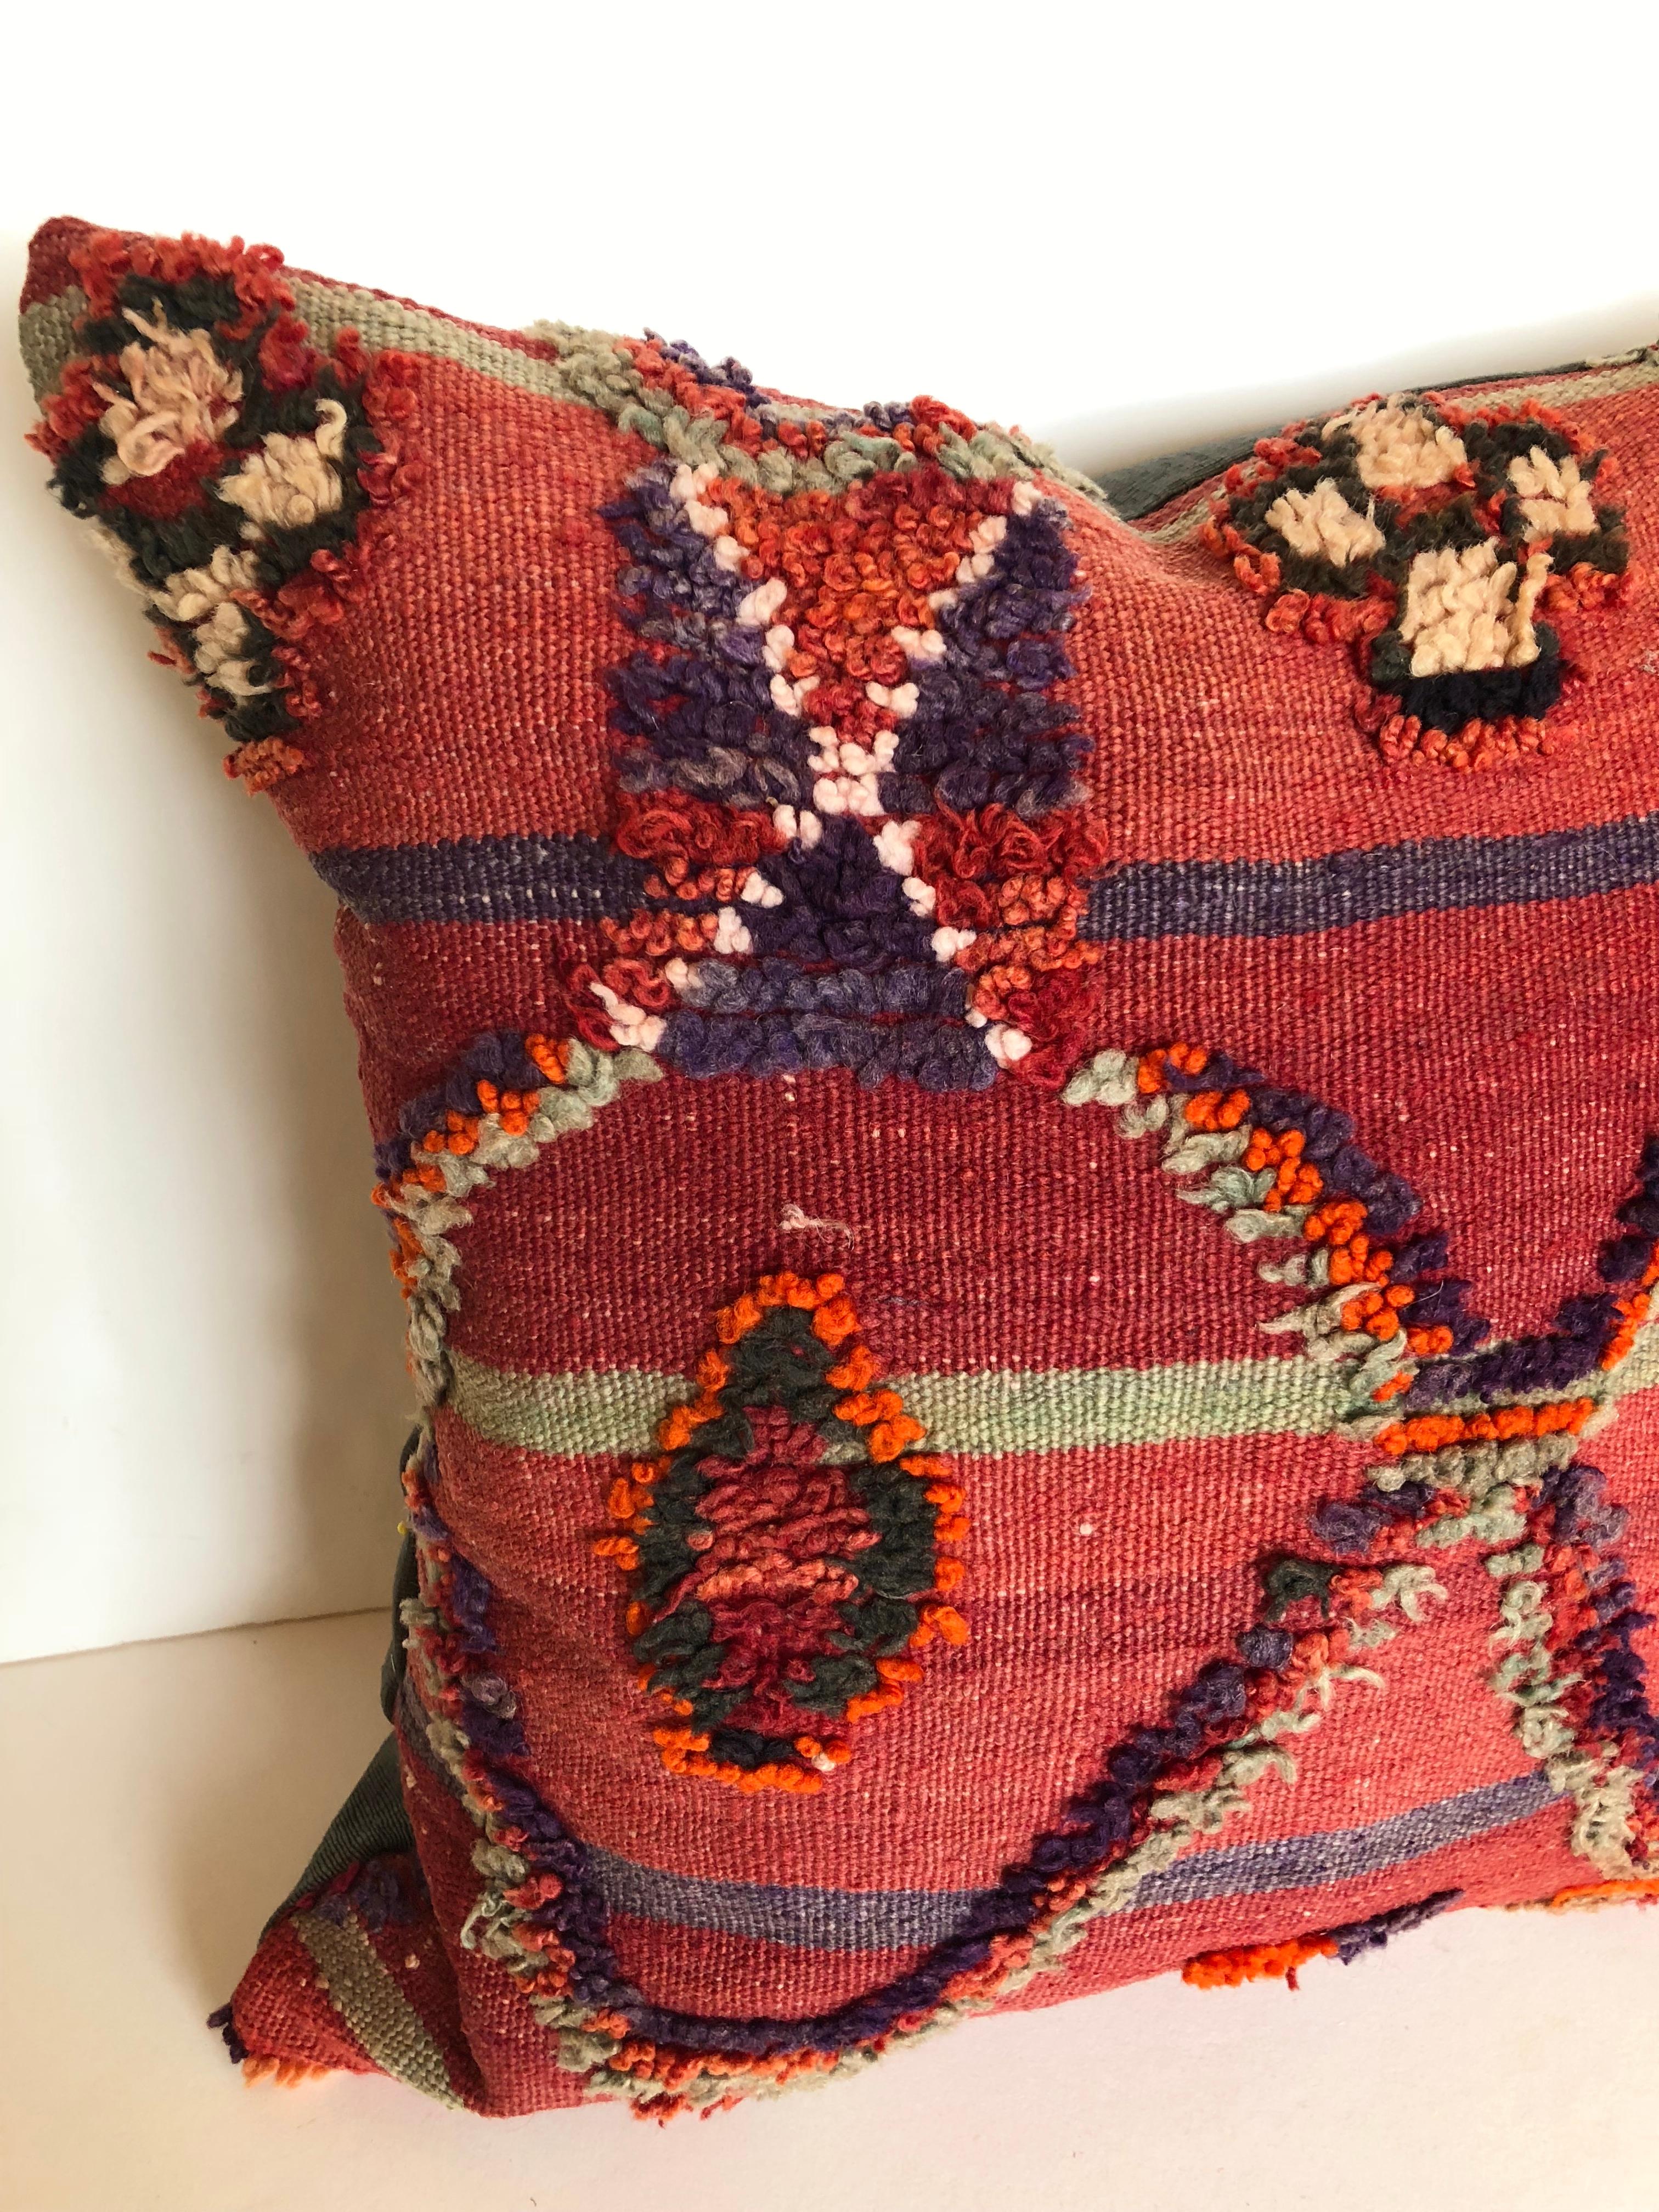 Custom pillow cut from a vintage hand loomed wool Ait Bou Ichaouen Moroccan Berber rug, one of the most remore, isolated tribes in Morocco. Bold colors and patterns reflect an older North African tradition unlike those from elsewhere. The pillow is